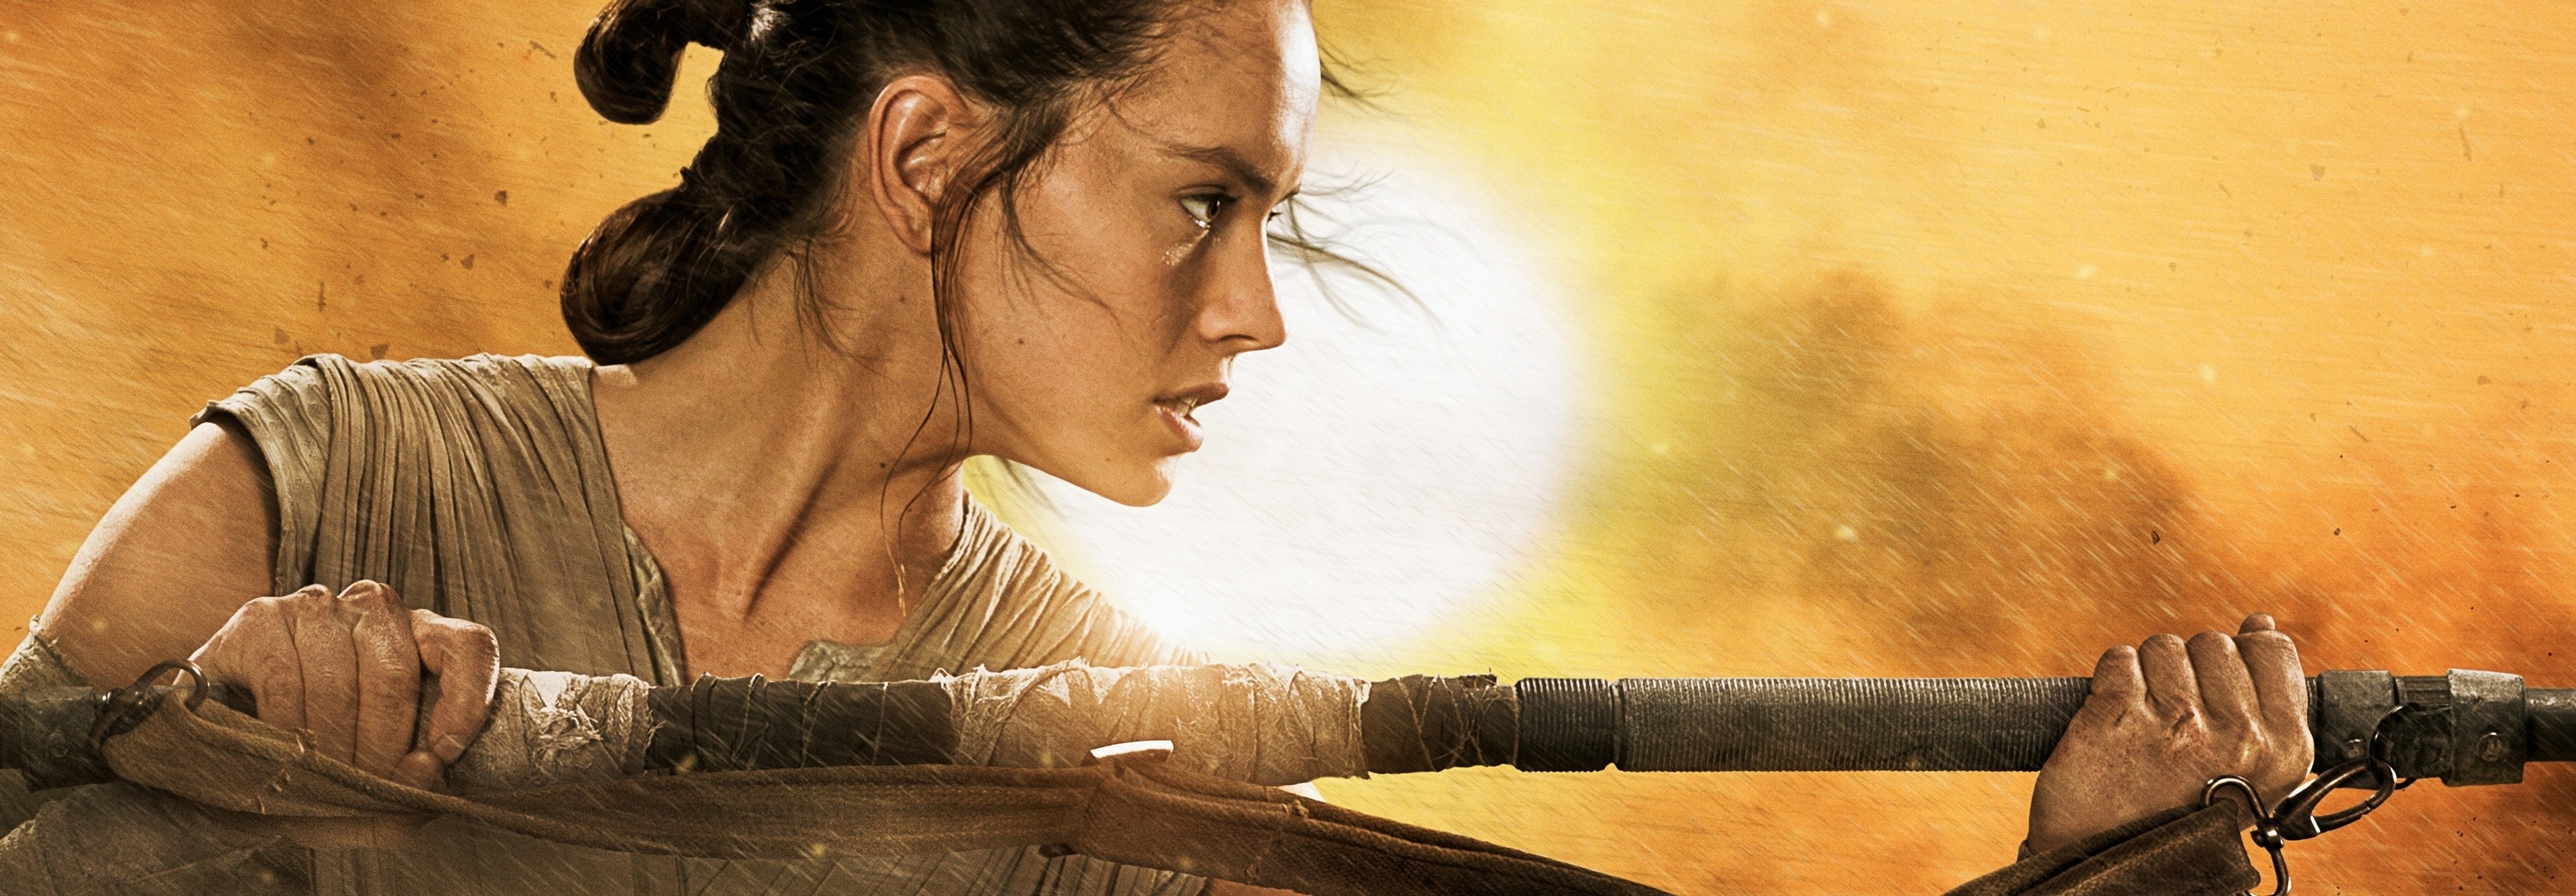 3581x1246 portrait movies Person Daisy Ridley screenshot computer wallpaper photo  shoot star wars episode vii the force